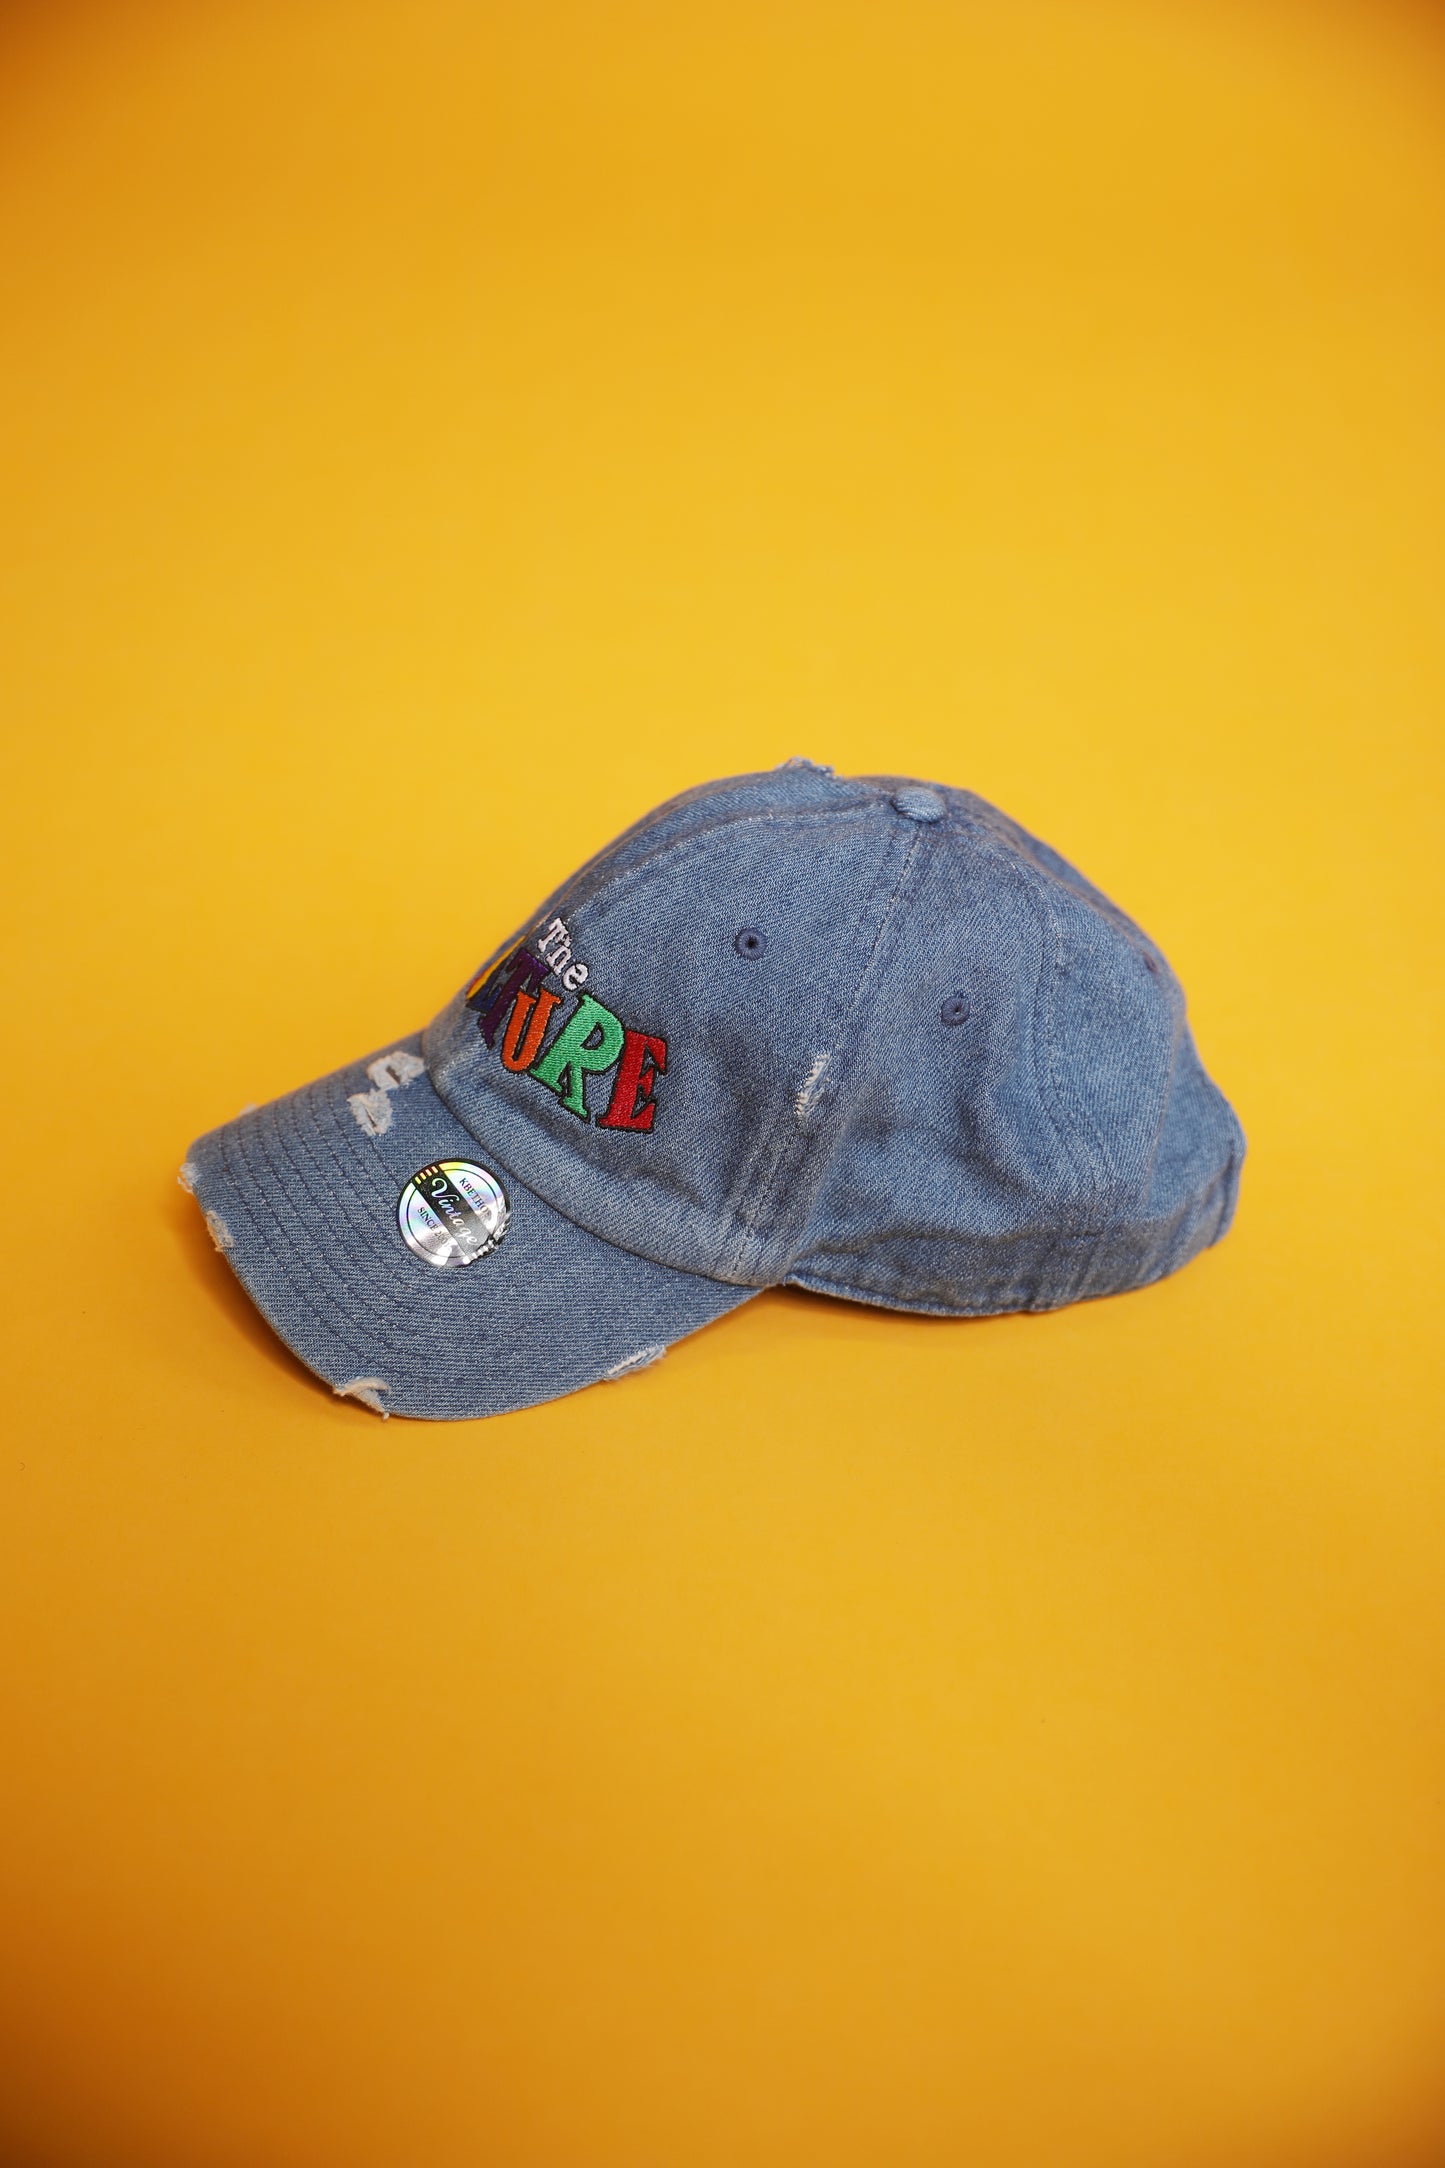 "For The Culture" Unisex Dad Hat in Distressed Denim